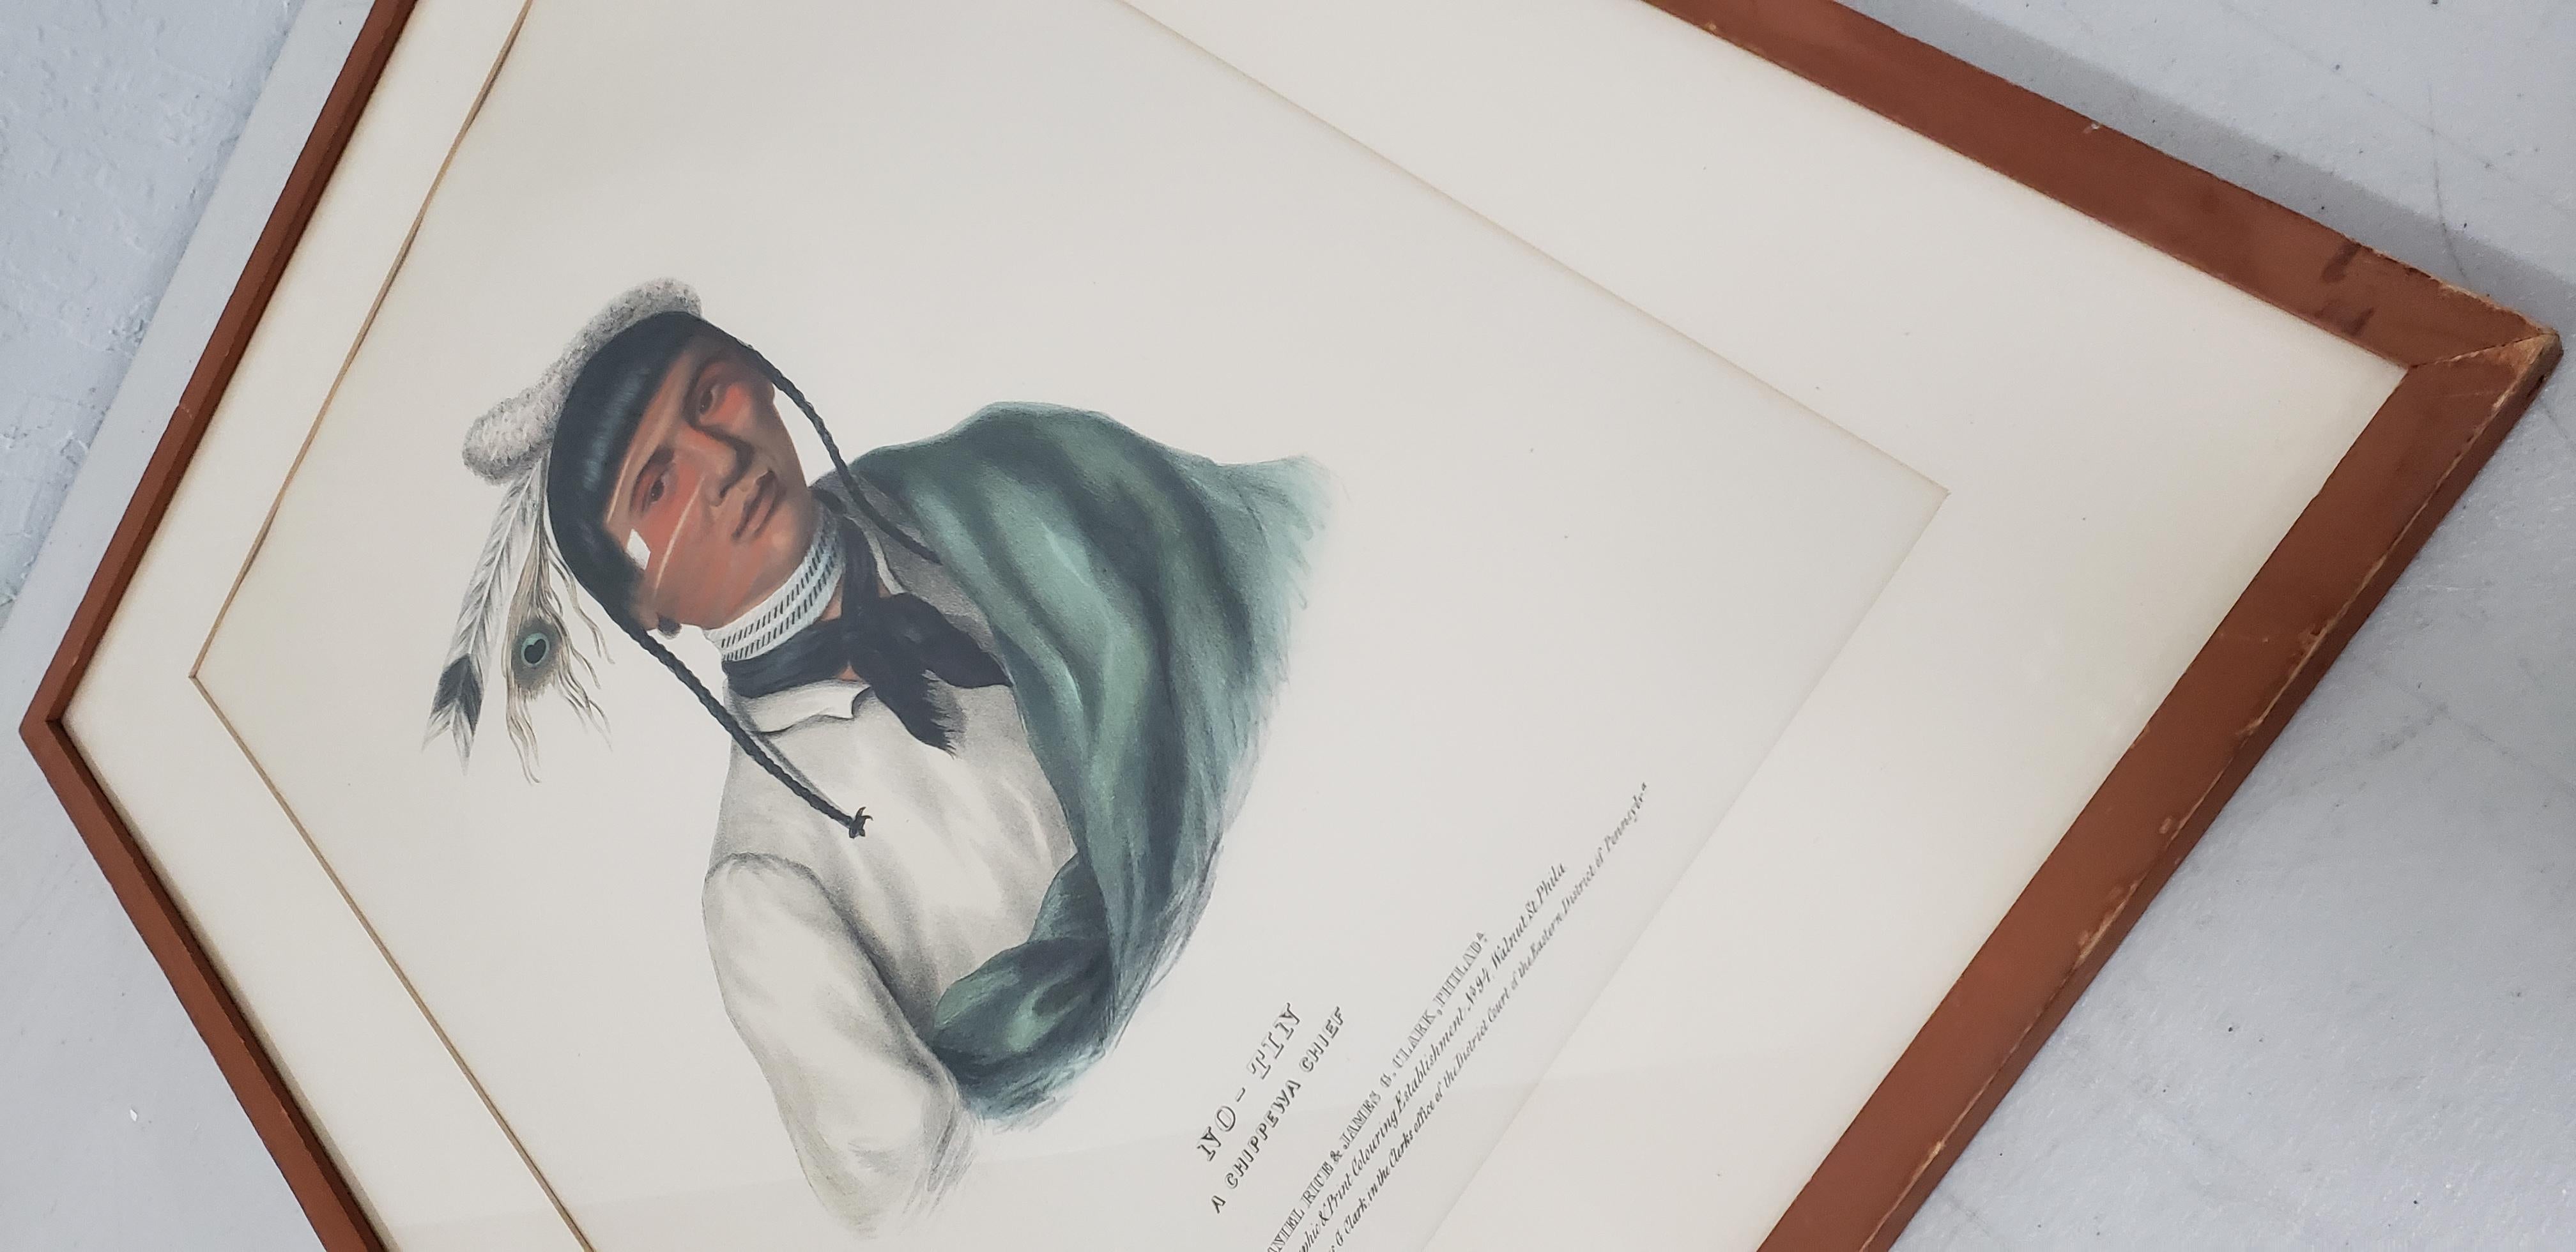 No-Tin, A Chippewa Chief - Tribal Print by McKenney & Hall